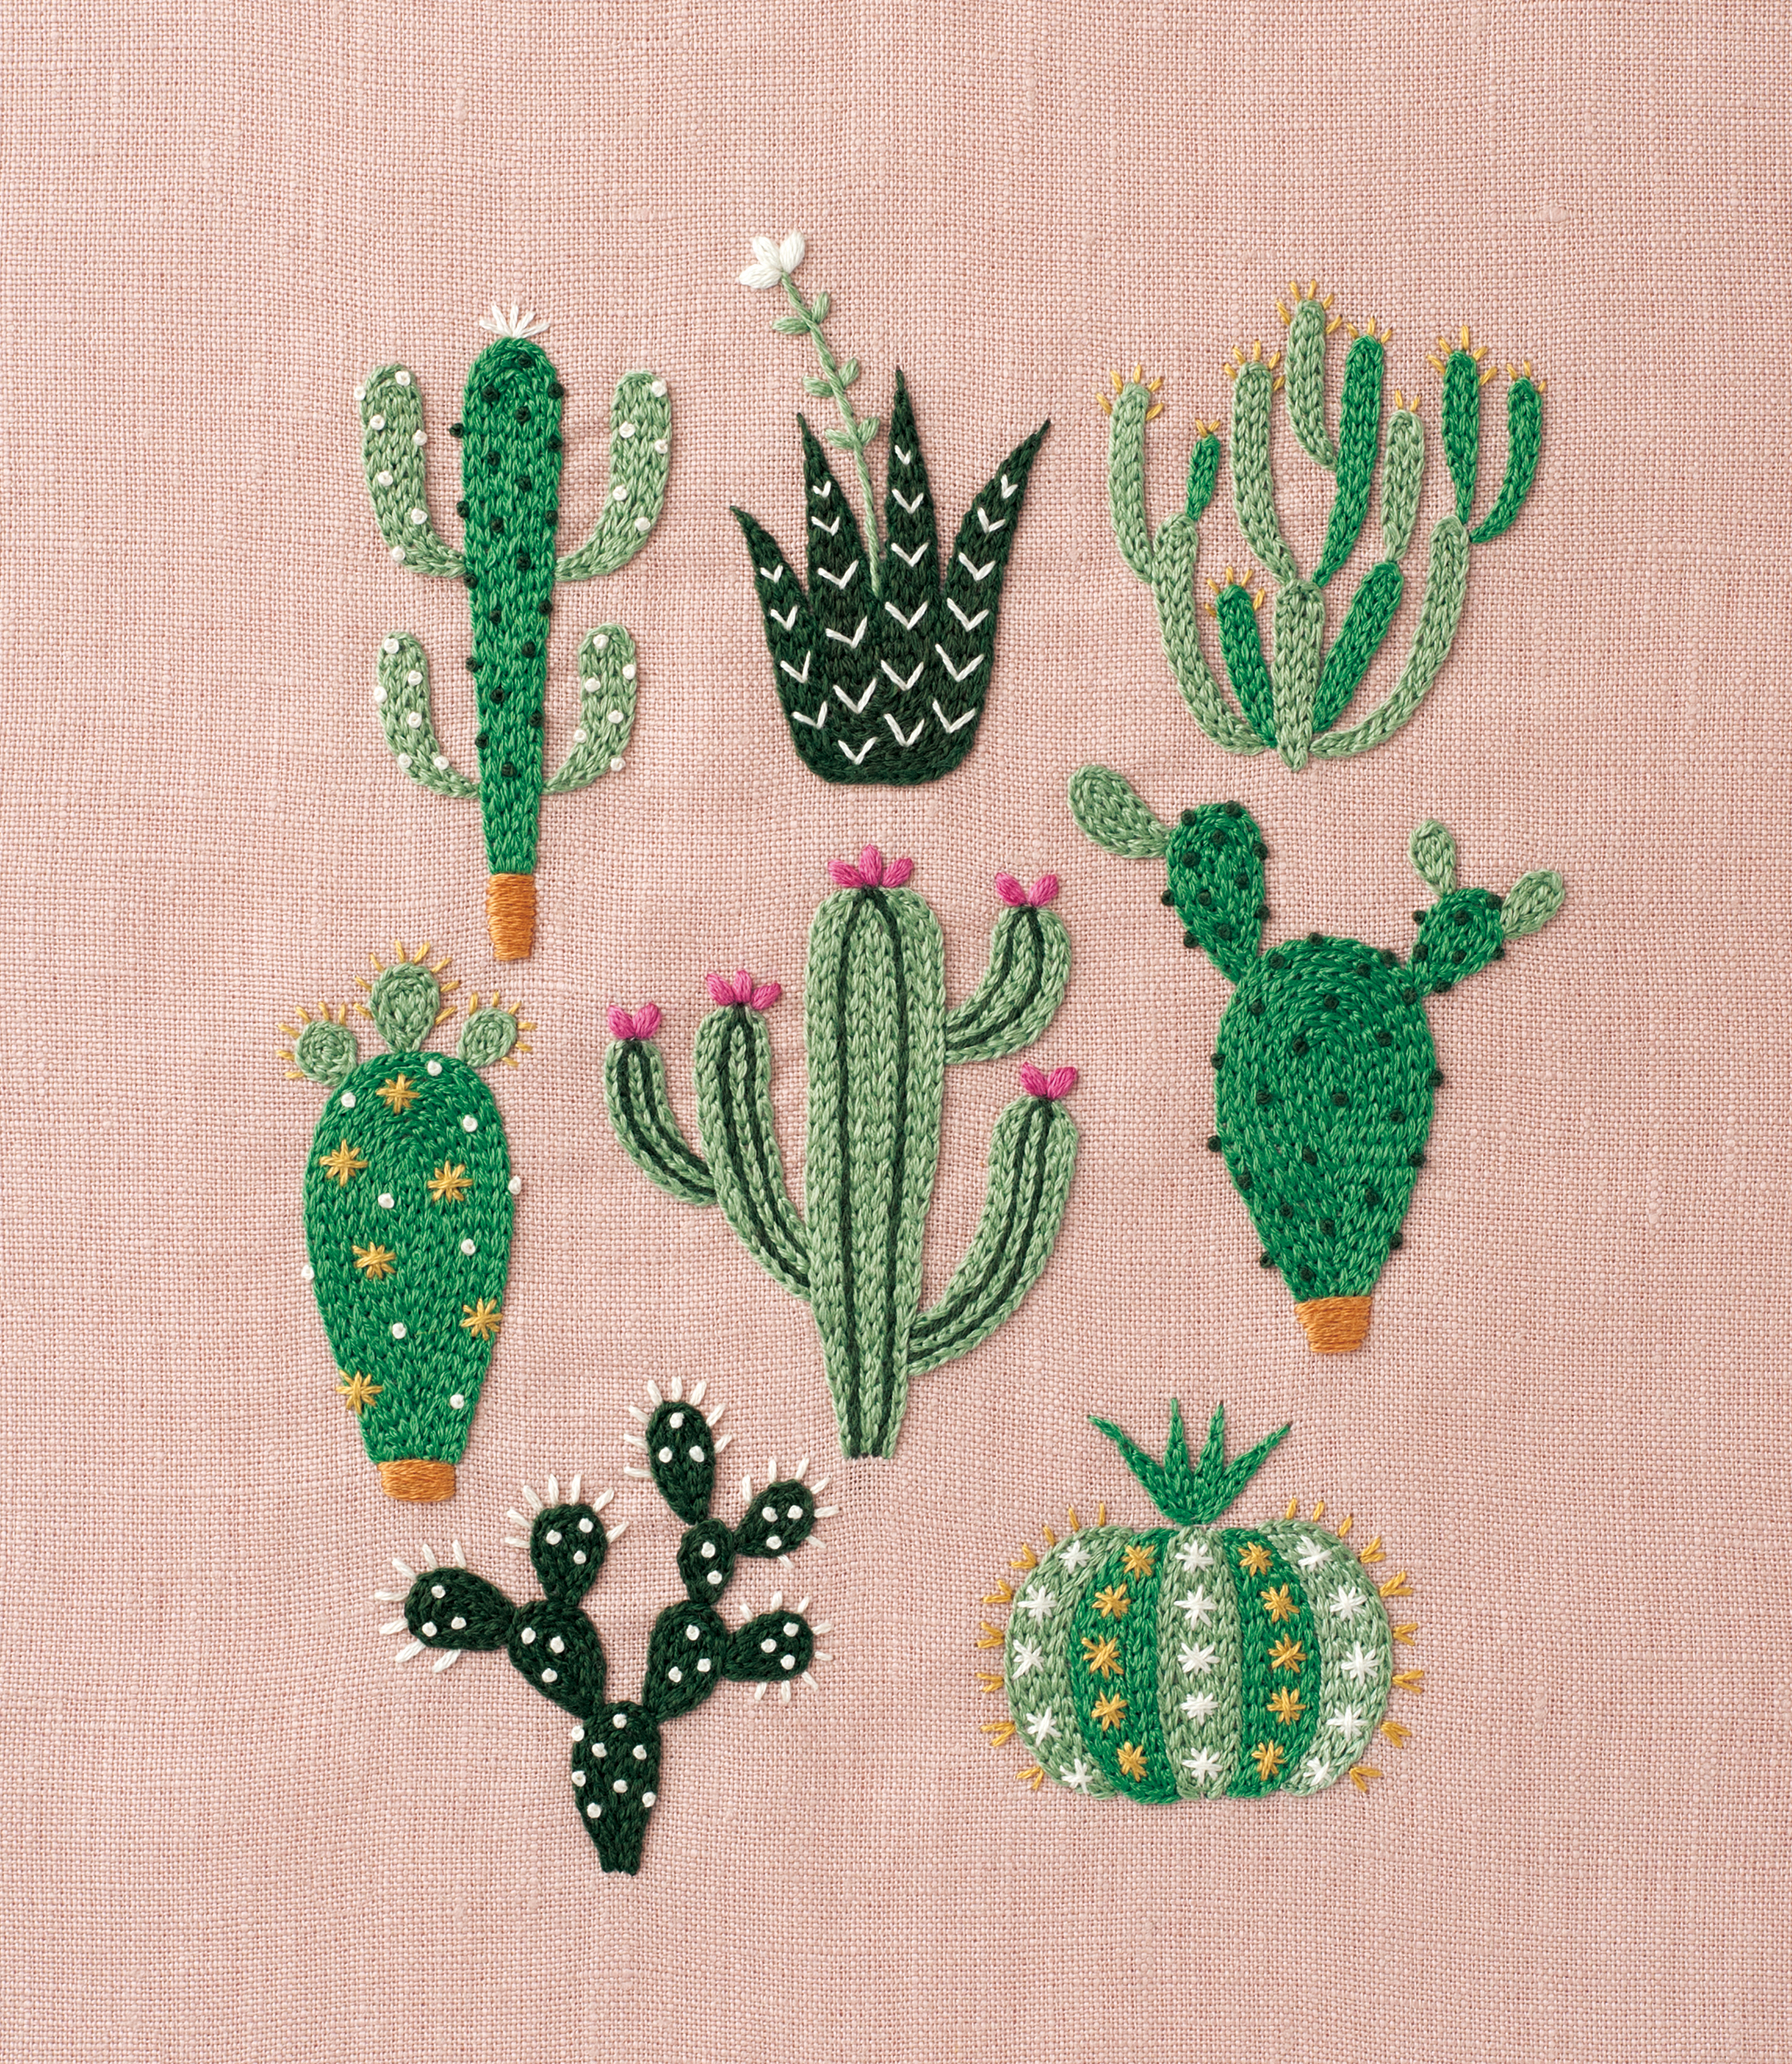 English Embroidery Patterns Diy Floral Cactus Embroidery Projects From A Year Of Embroidery